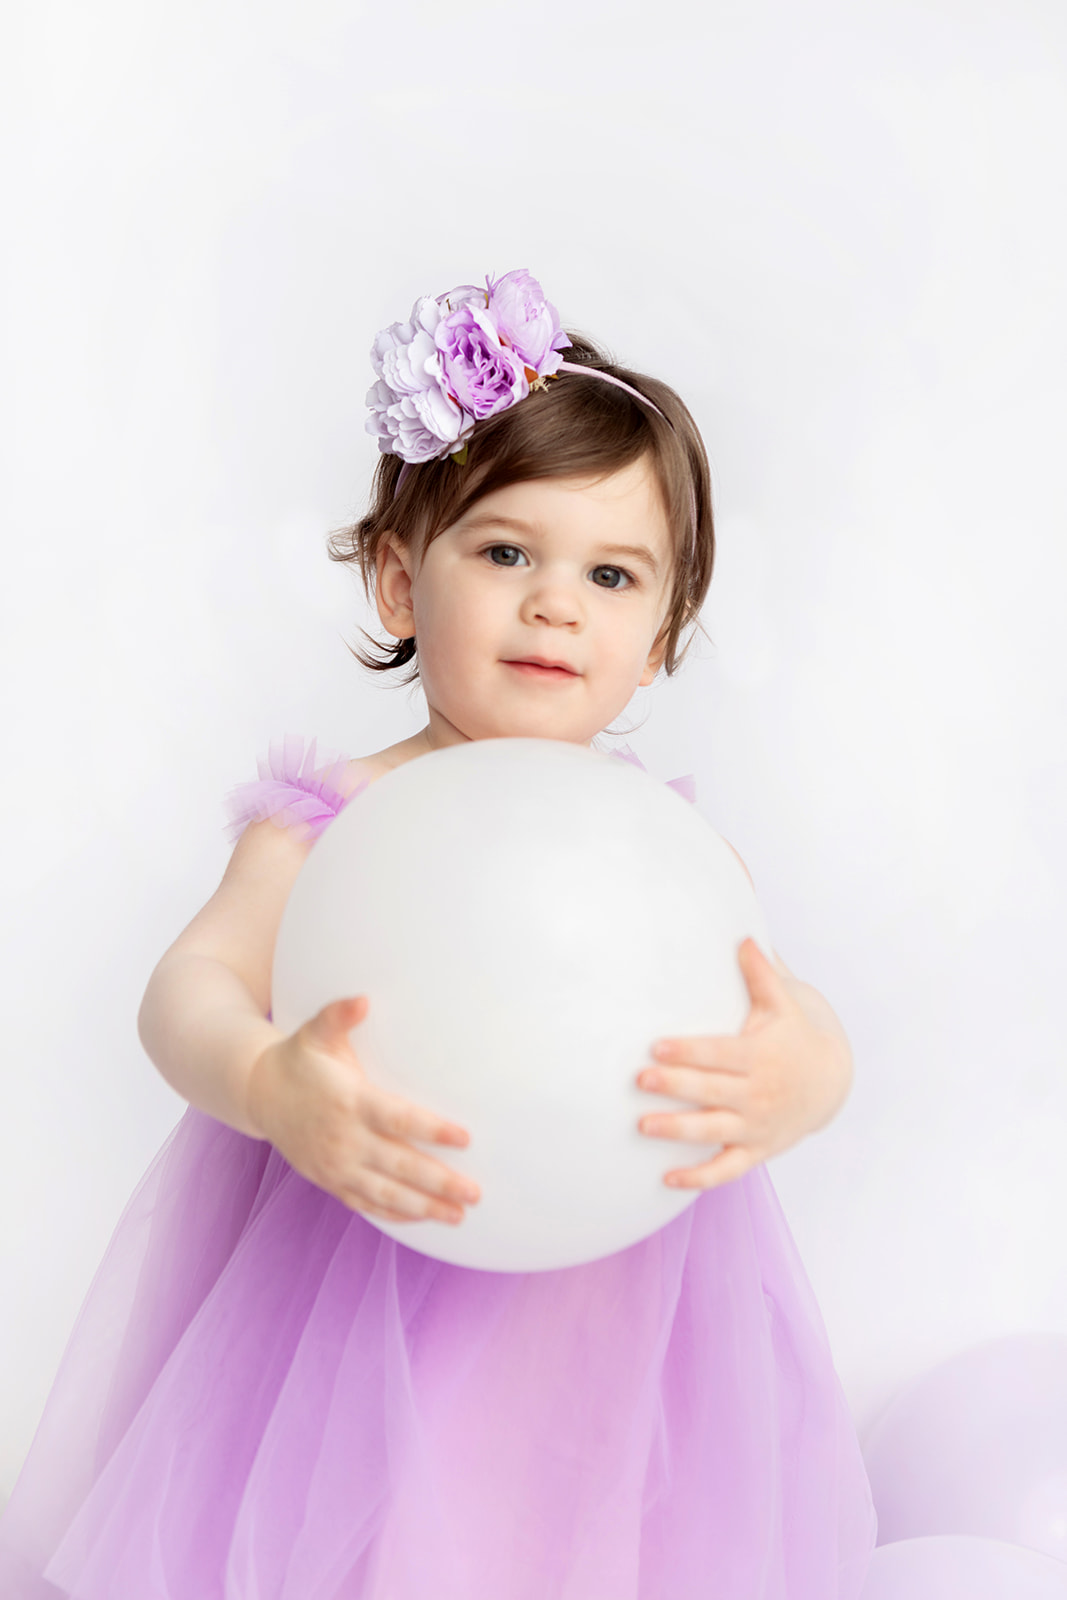 A two year-old little girl with short, chestnut brown hair, is photographed for her second birthday. She wears a delicate headband with a large purple flower on it, and holds a large white balloon in her arms like a playground ball. Her full, purple tulle party dress and lavender balloons bring visual interest to the modern milestone portrait.